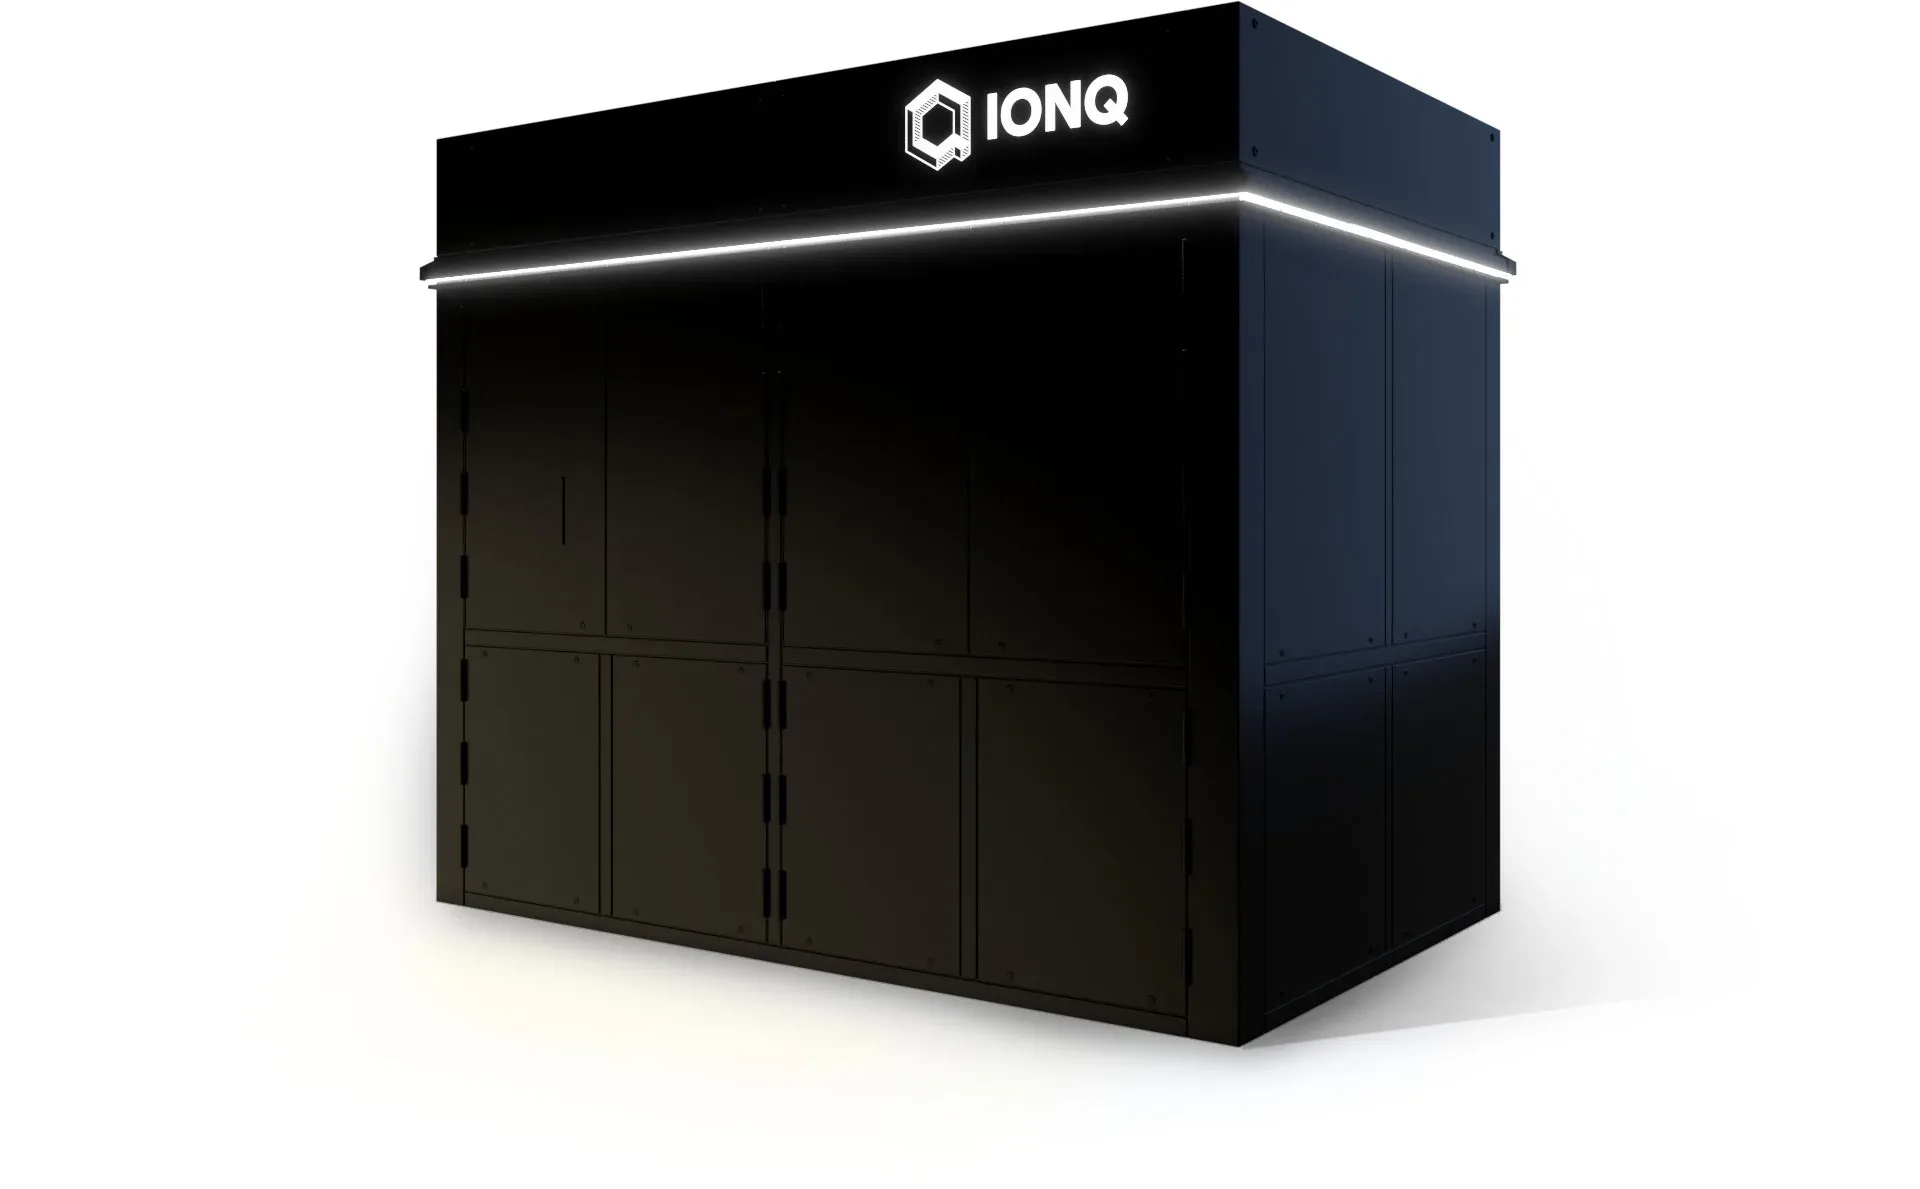 First In Quantum. Ionq Is To Be The First Publicly Traded Pure-Play Quantum Computing Company